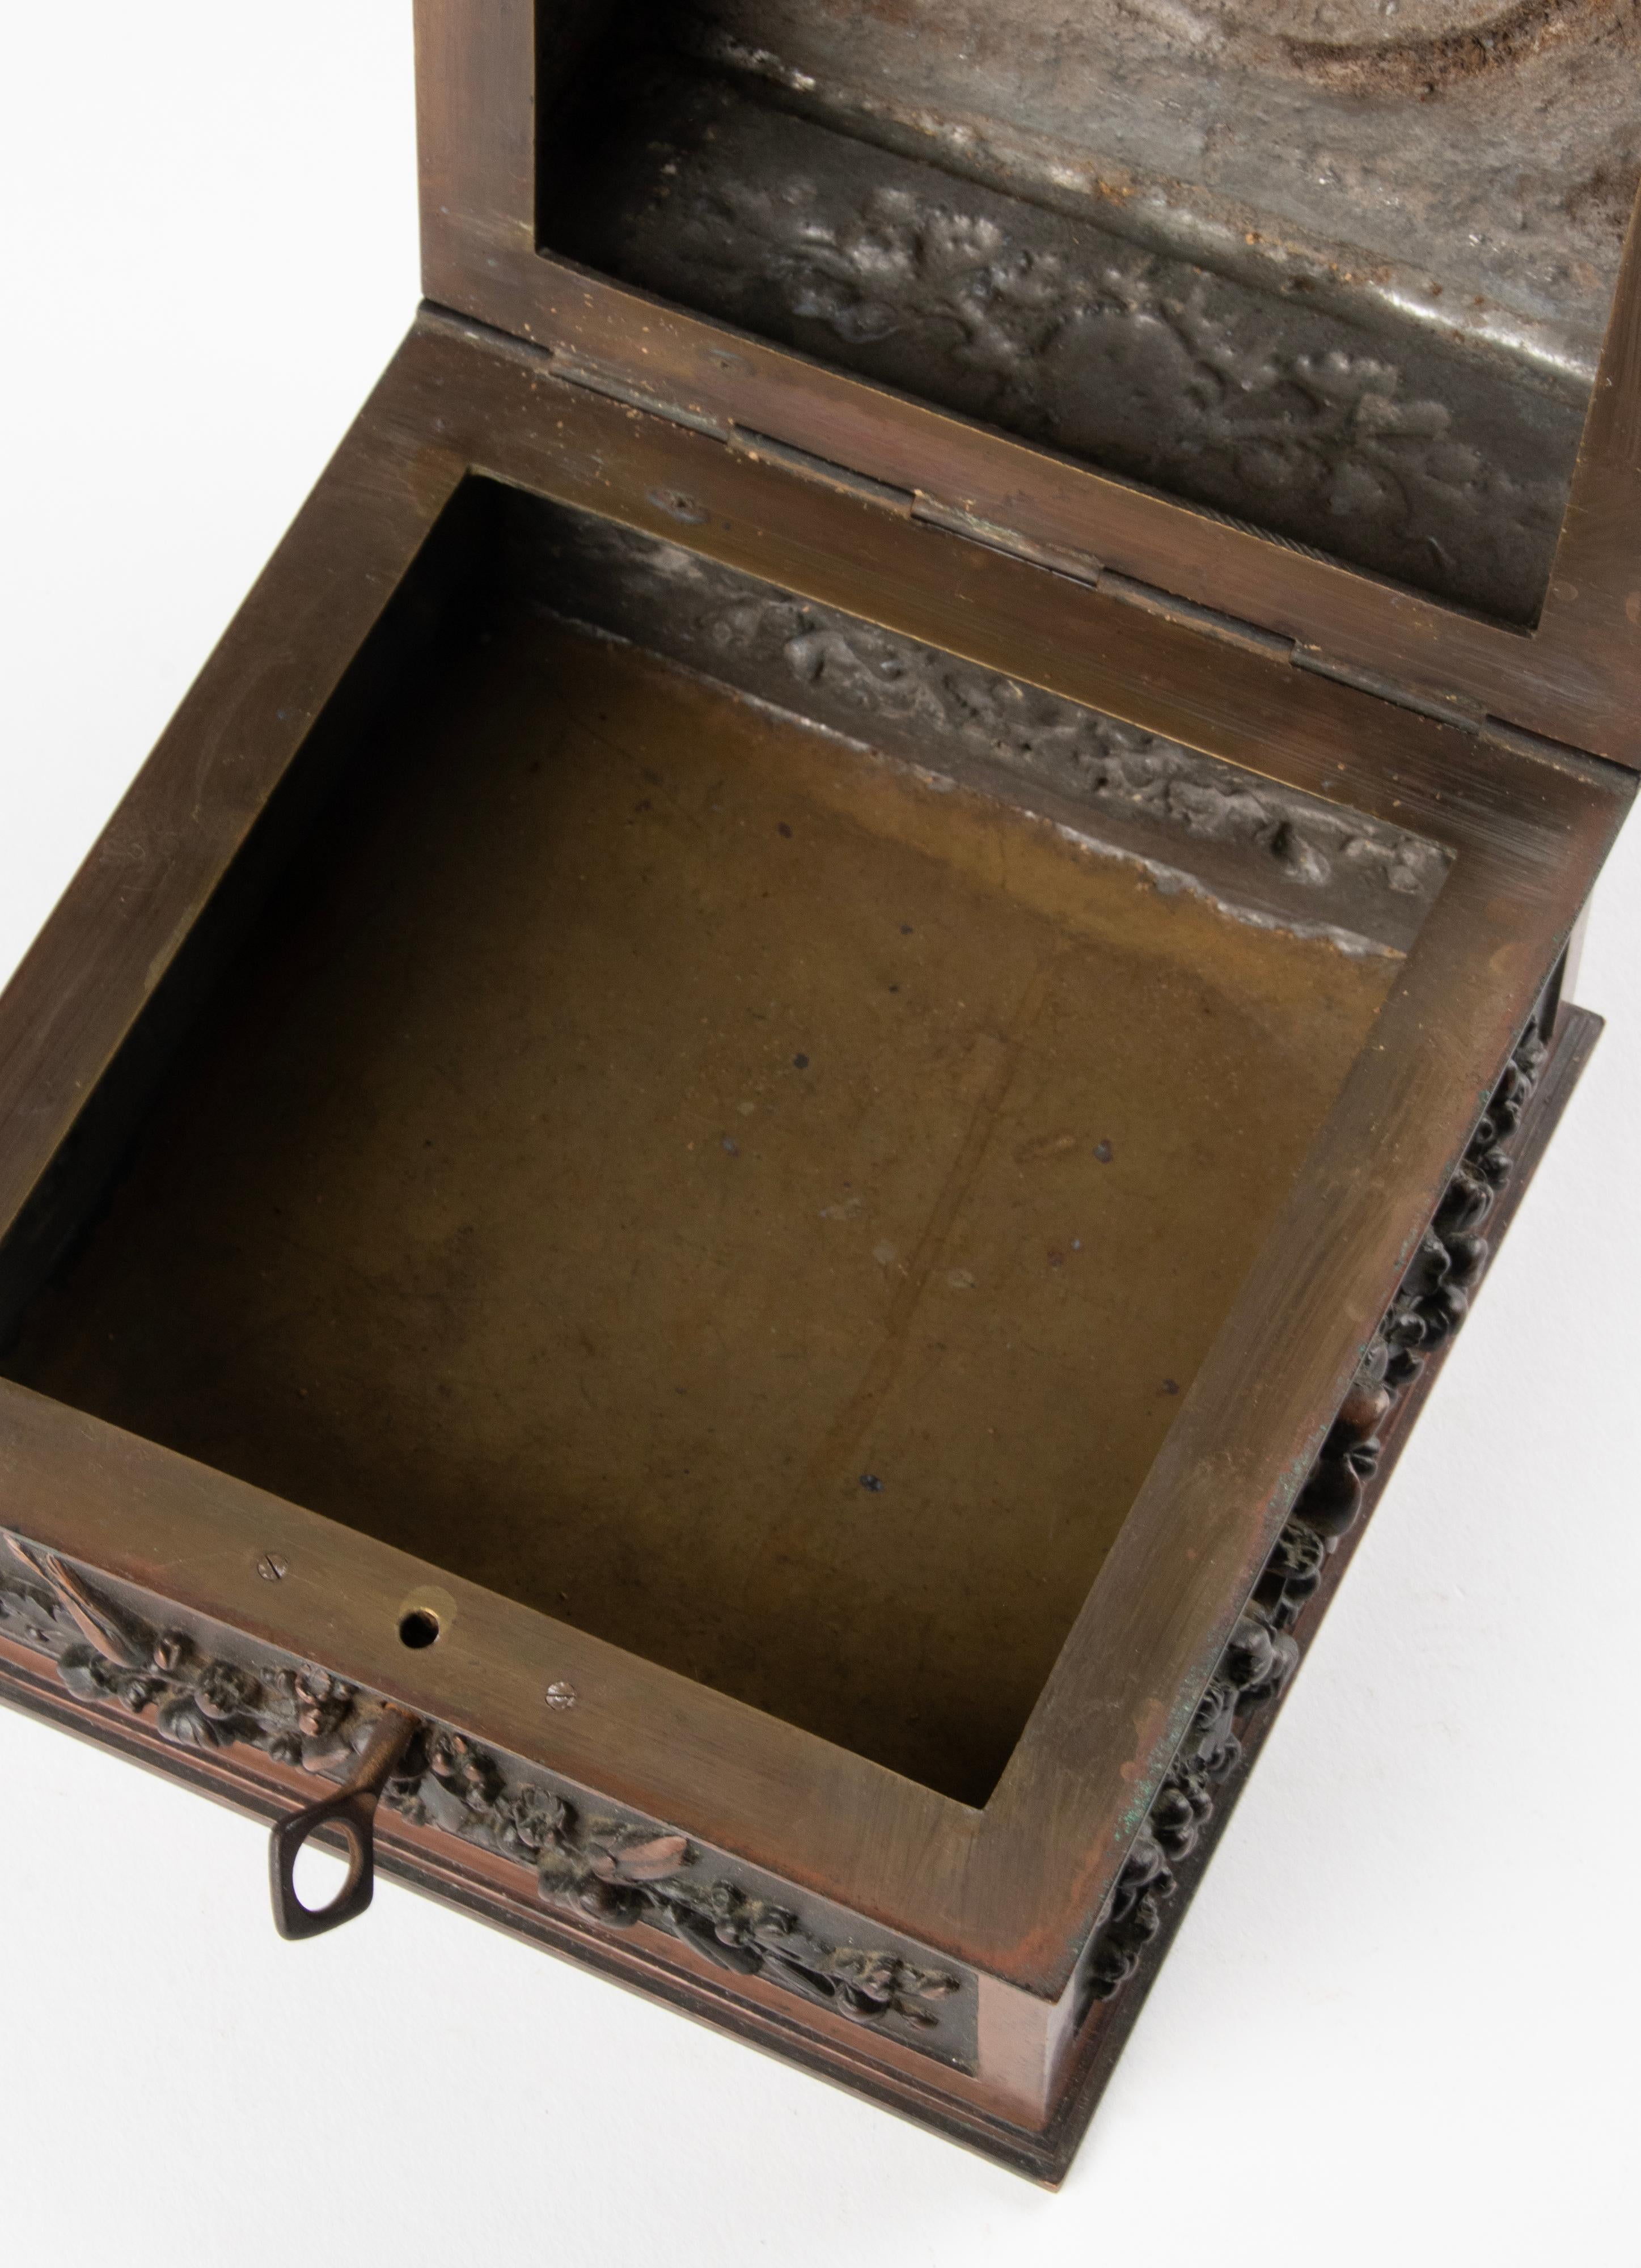 Late 19th Century Black Forest Bronze Decorative Box by Leopold Oudry & Cie. For Sale 6